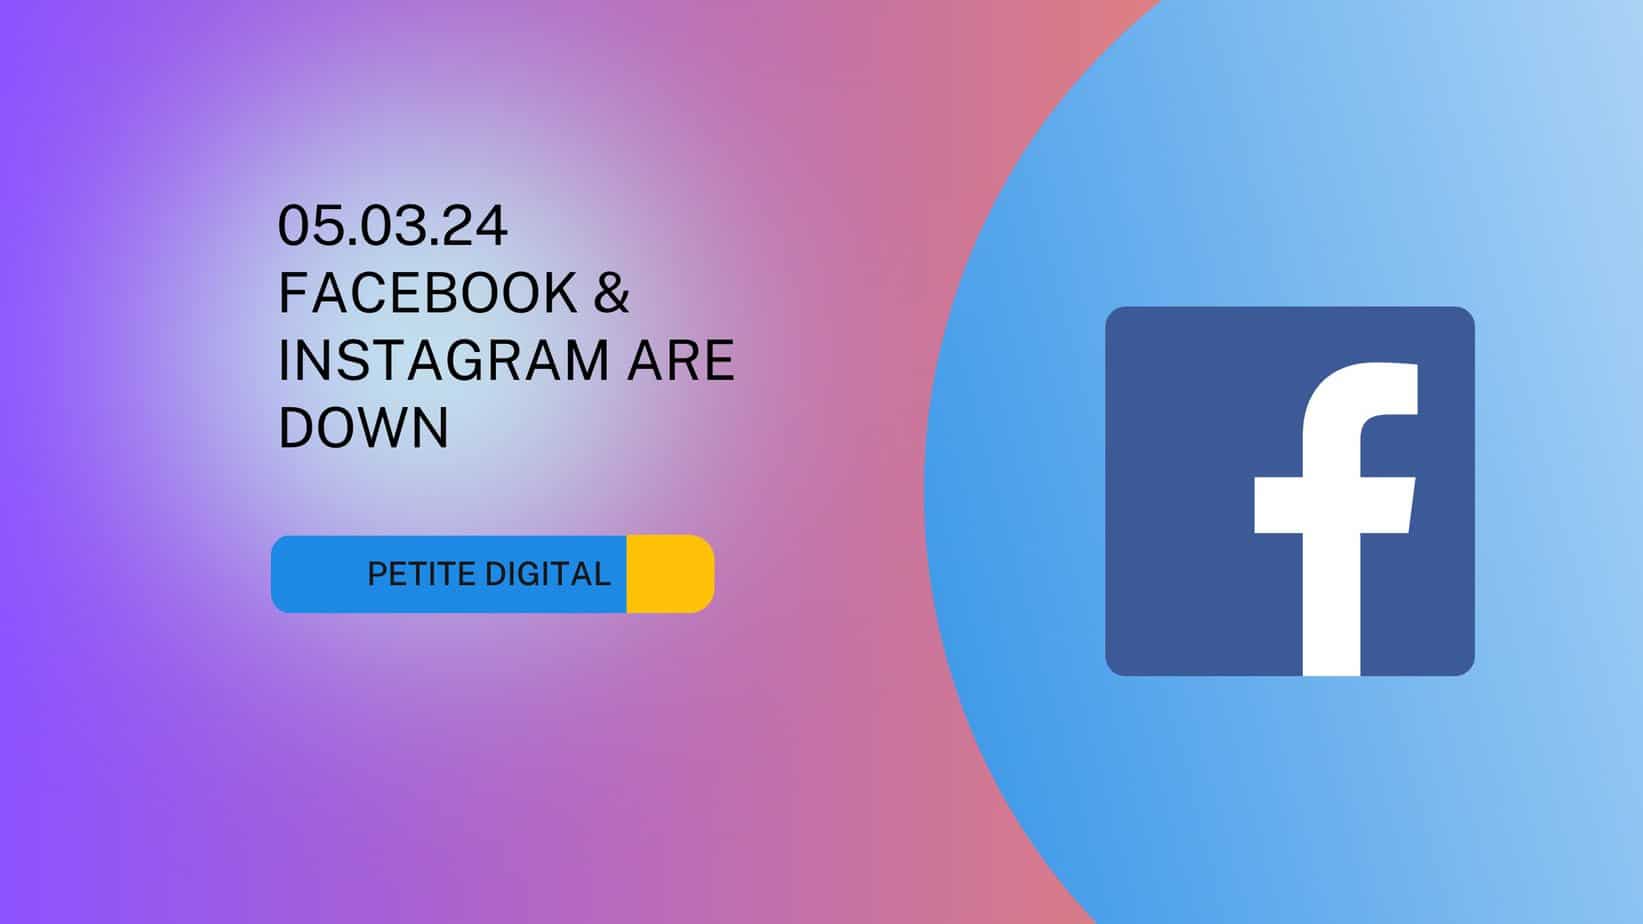 Facebook is down 05.03.2024 Live updates are being made in the post